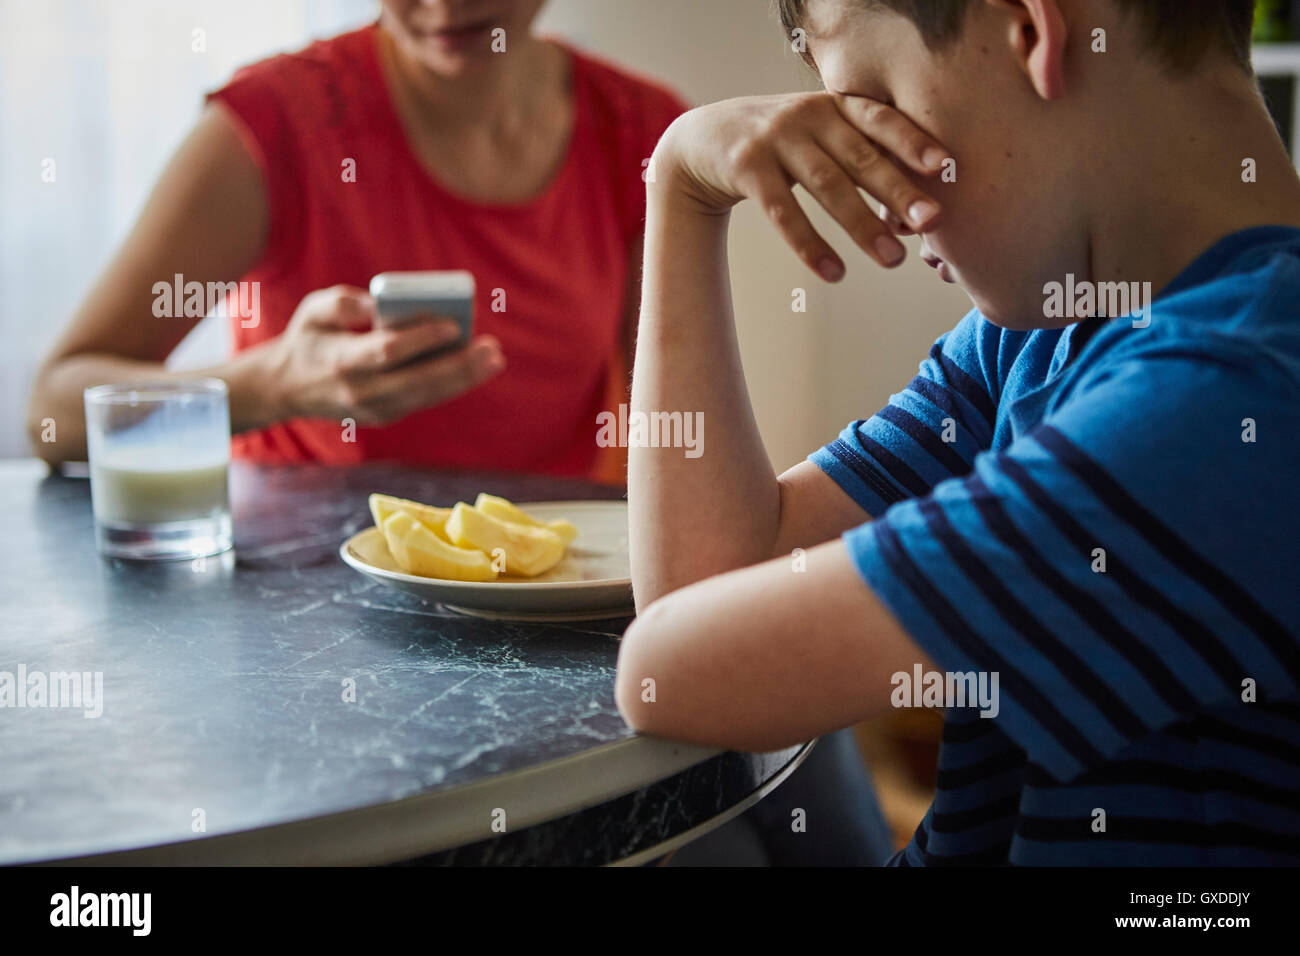 Boy at dining table, hand on eyes looking upset Stock Photo